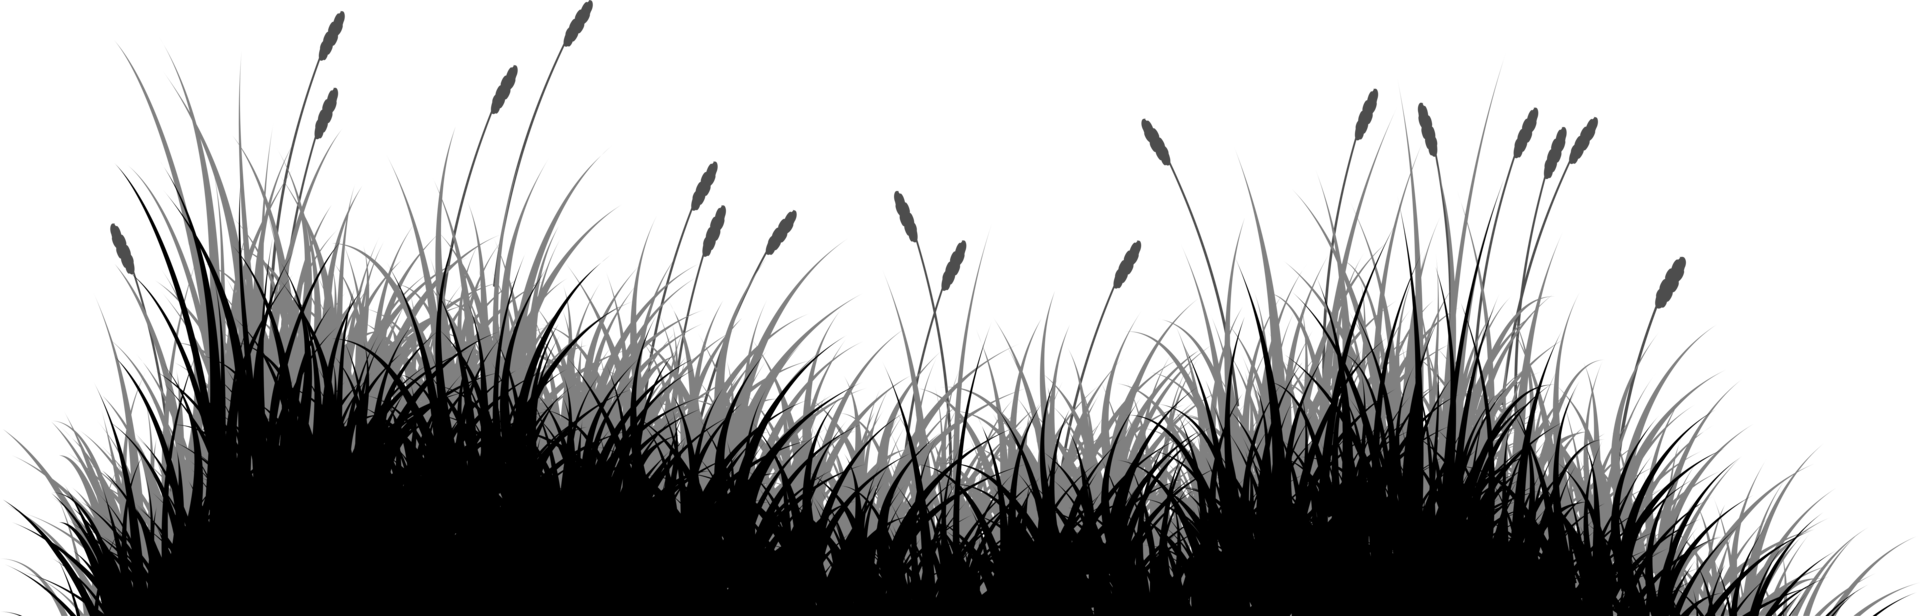 reeds grass silhouette, grass silhouette, meadow png